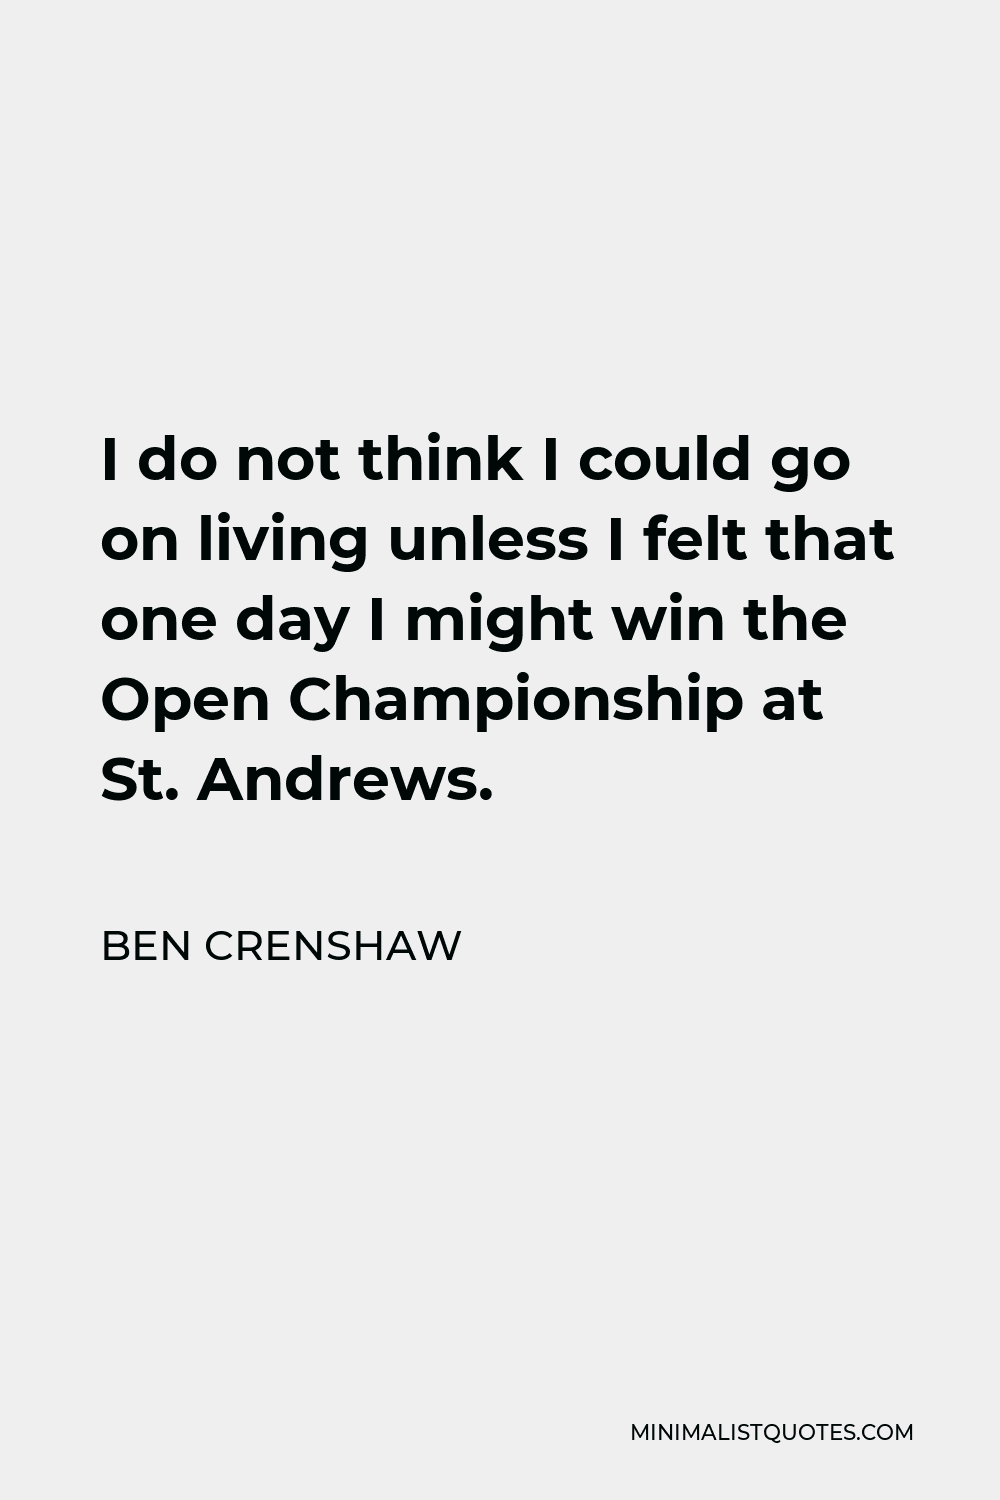 Ben Crenshaw Quote - I do not think I could go on living unless I felt that one day I might win the Open Championship at St. Andrews.